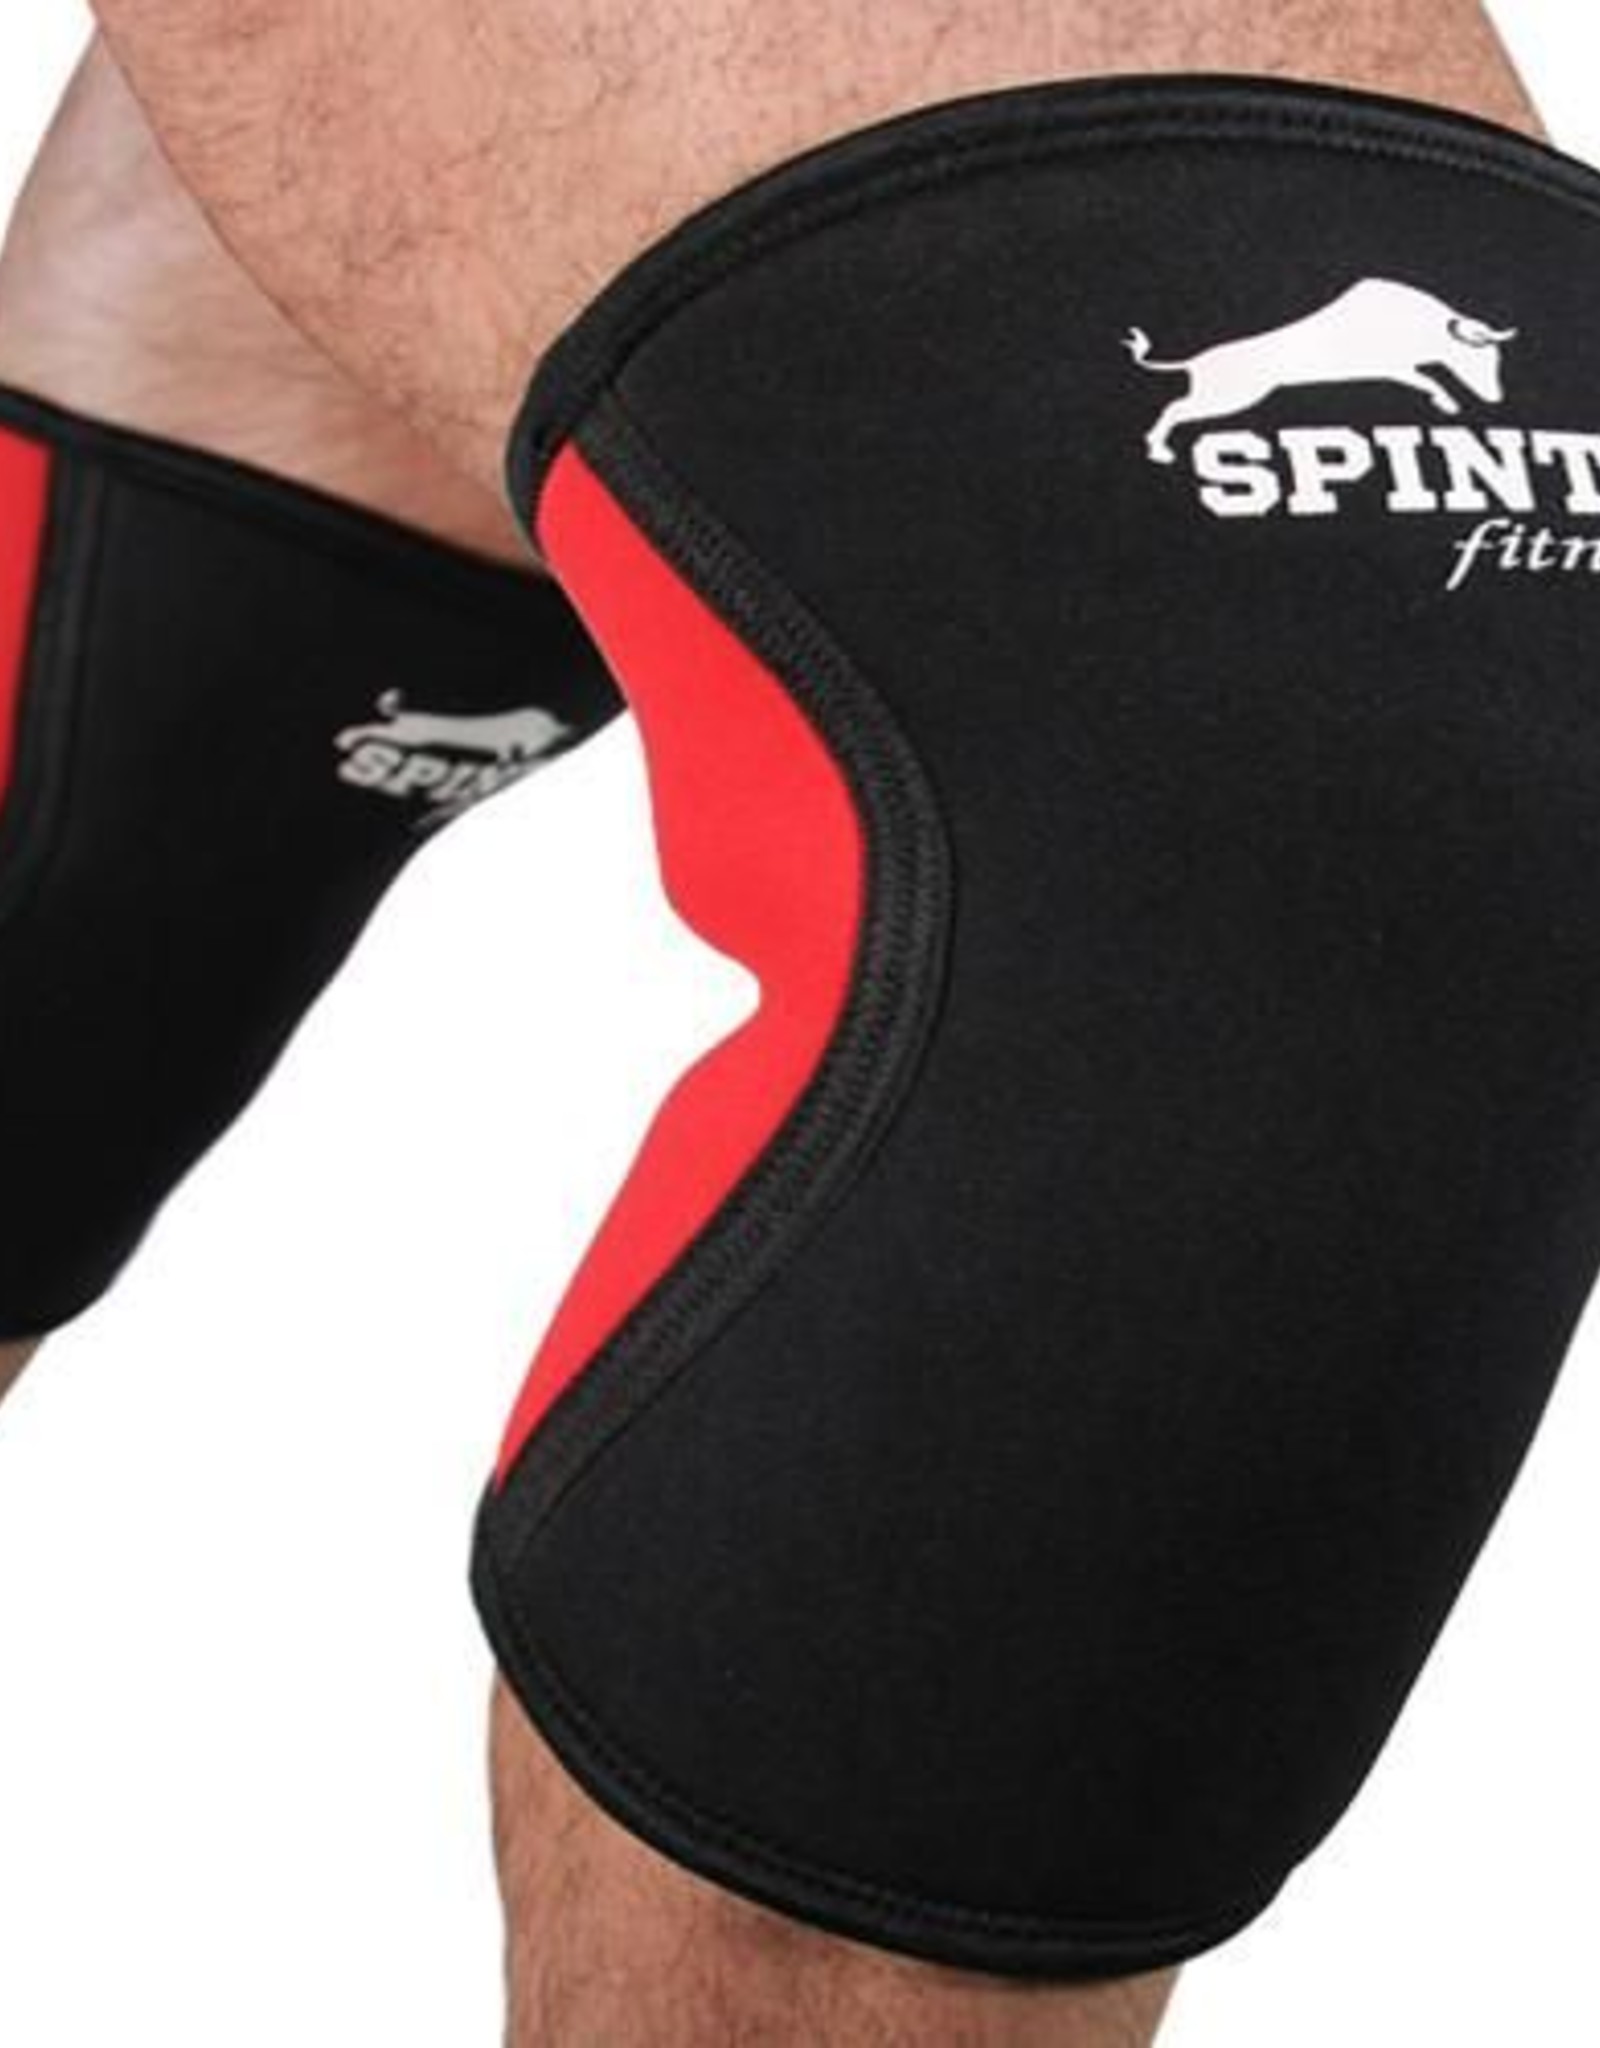 Spinto Fitness Spinto Knee Sleeves